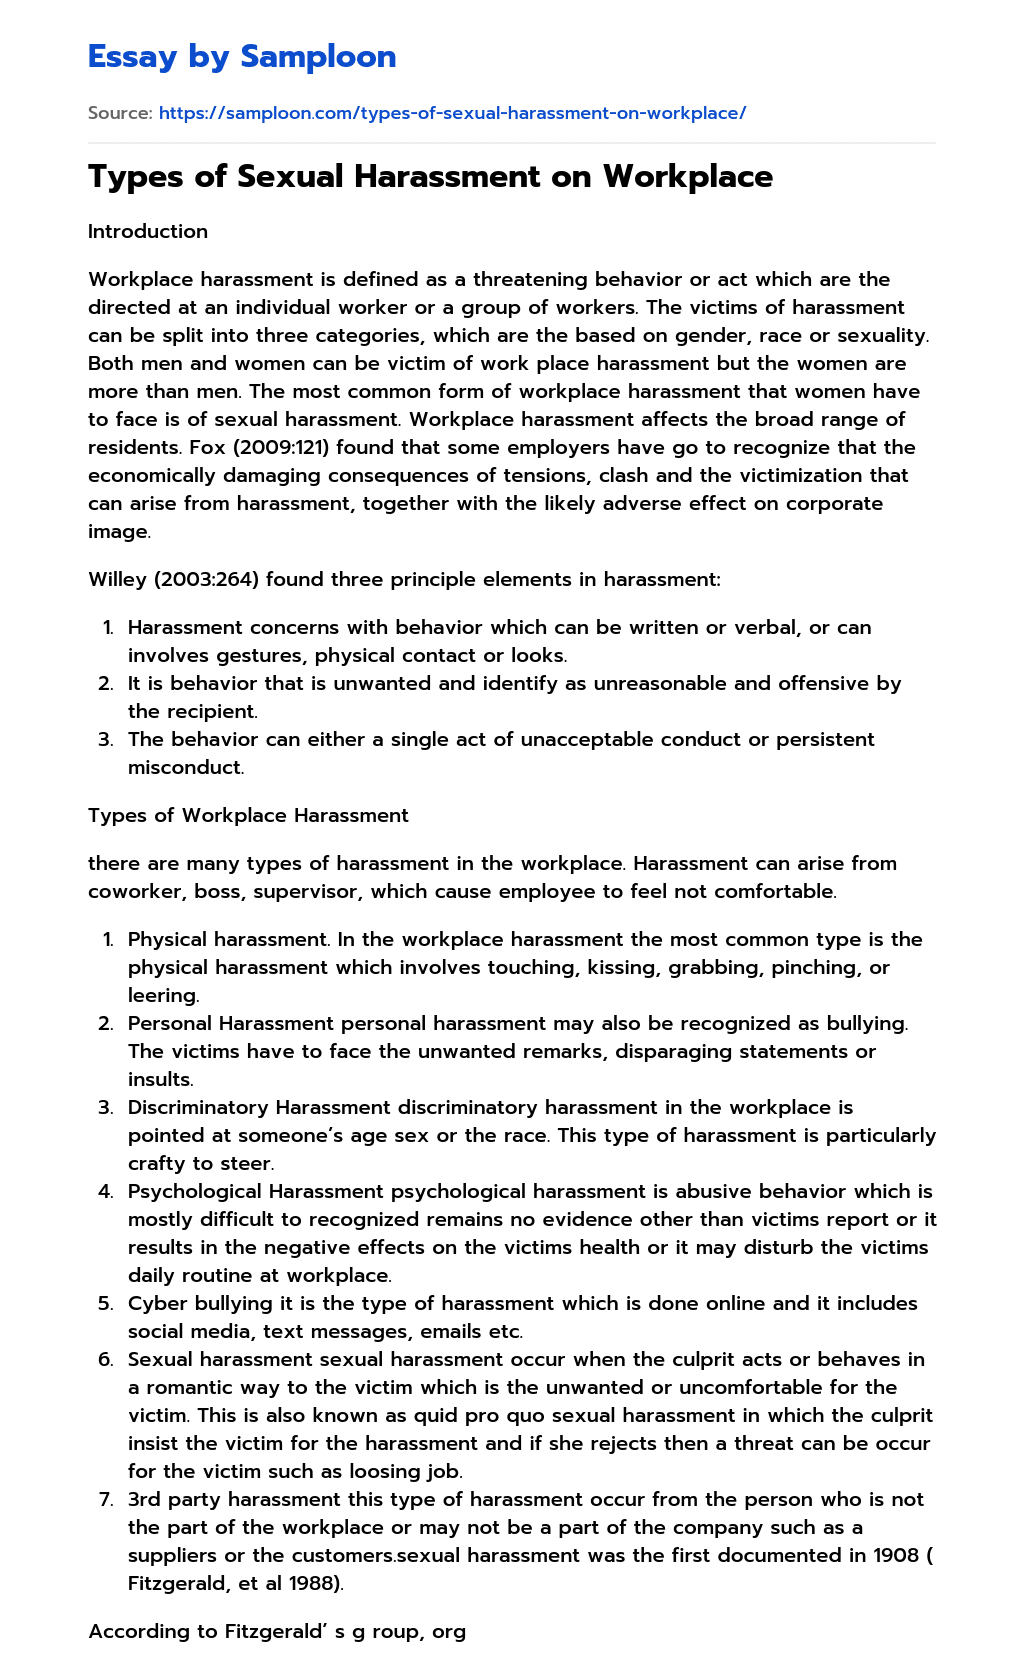 Types of Sexual Harassment on Workplace essay